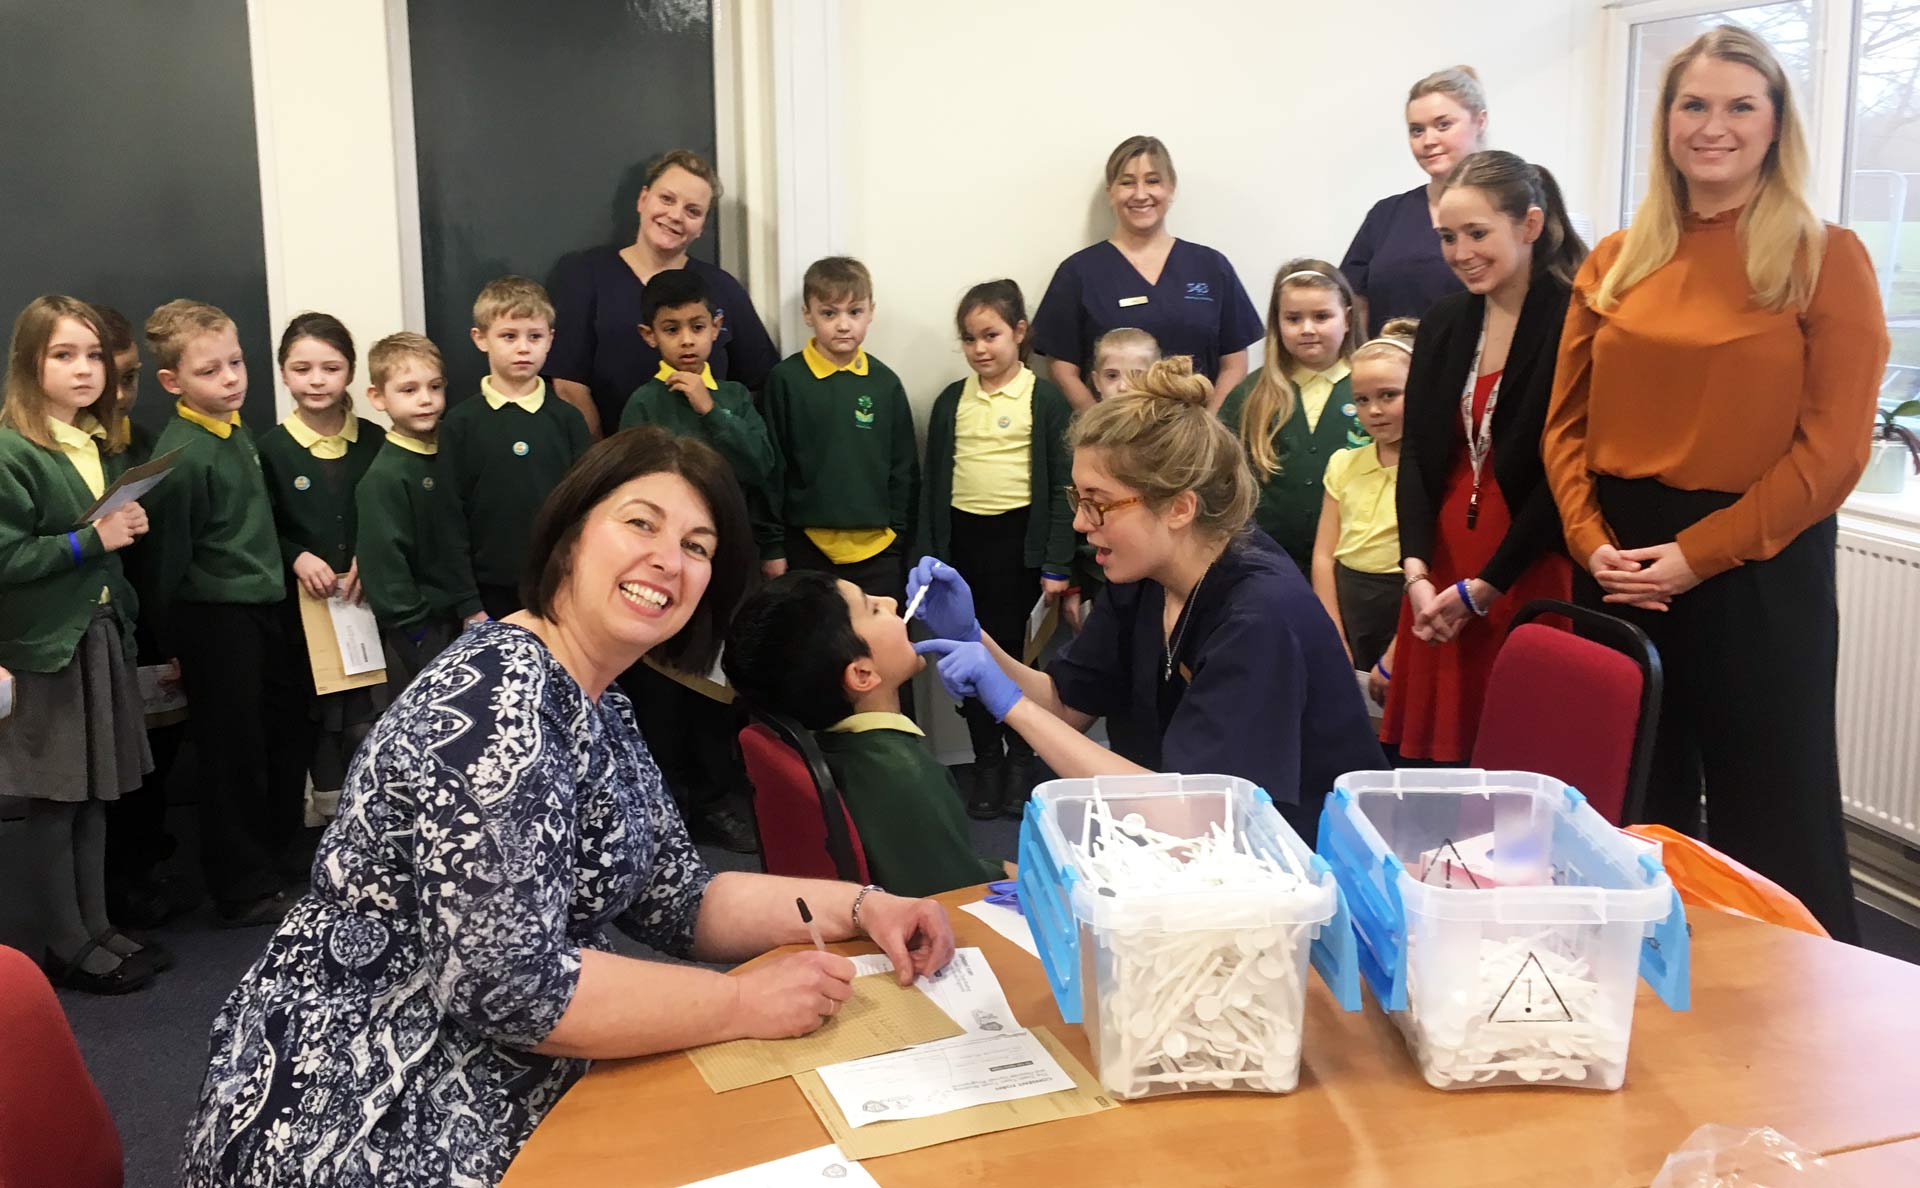 Hull children’s dental education charity receives Donation from the Joseph & Annie Cattle Trust